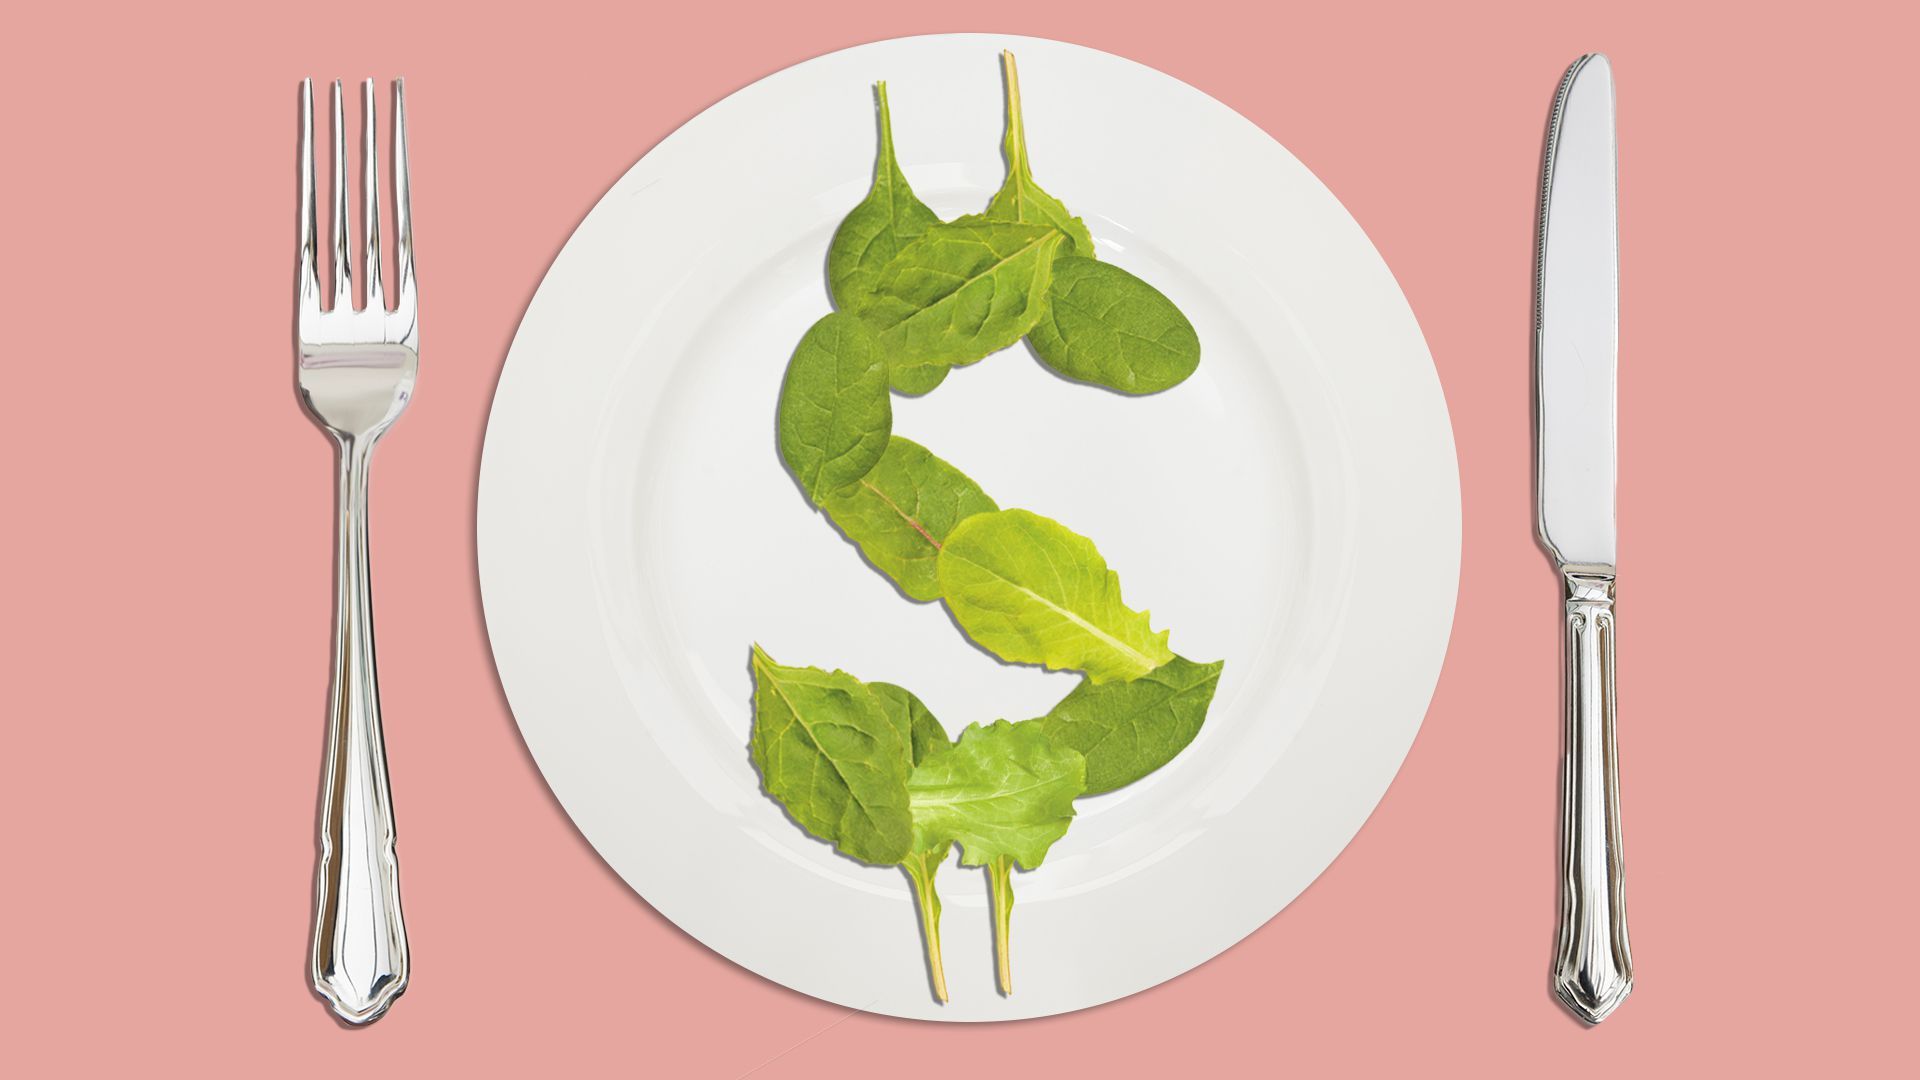 Illustration of a dinner set with a money sign made of lettuce leaves.